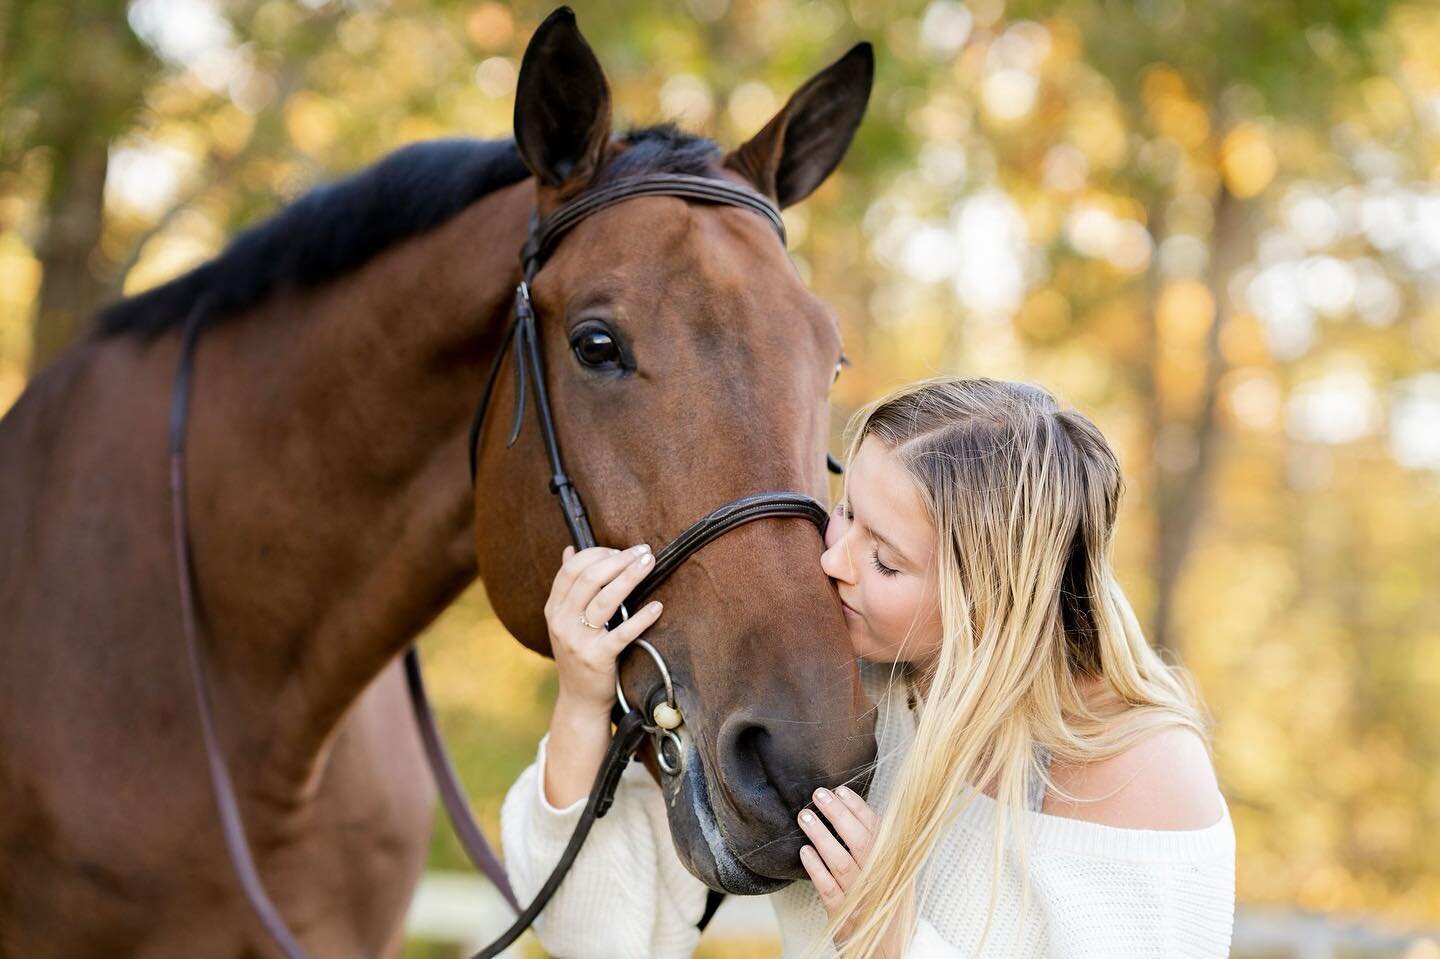 Happy thanksgiving🦃🍁
~
I have an endless amount to be grateful for, and am so incredibly thankful for this horse! My best friend🤍
~
Picture taken by @jesswindhurst